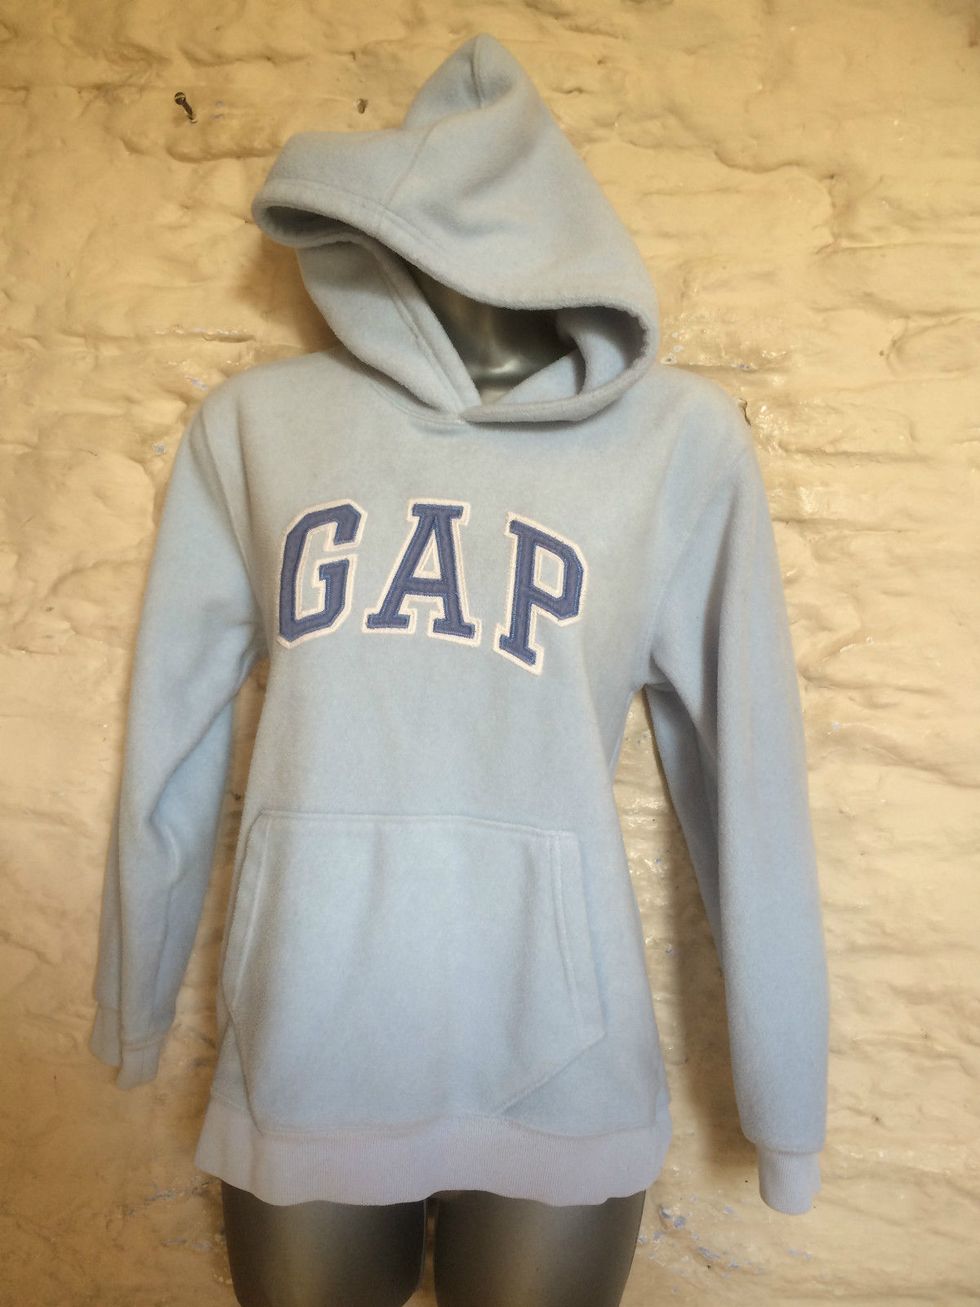 Clothes we wore in the '90s: Gap hoodies